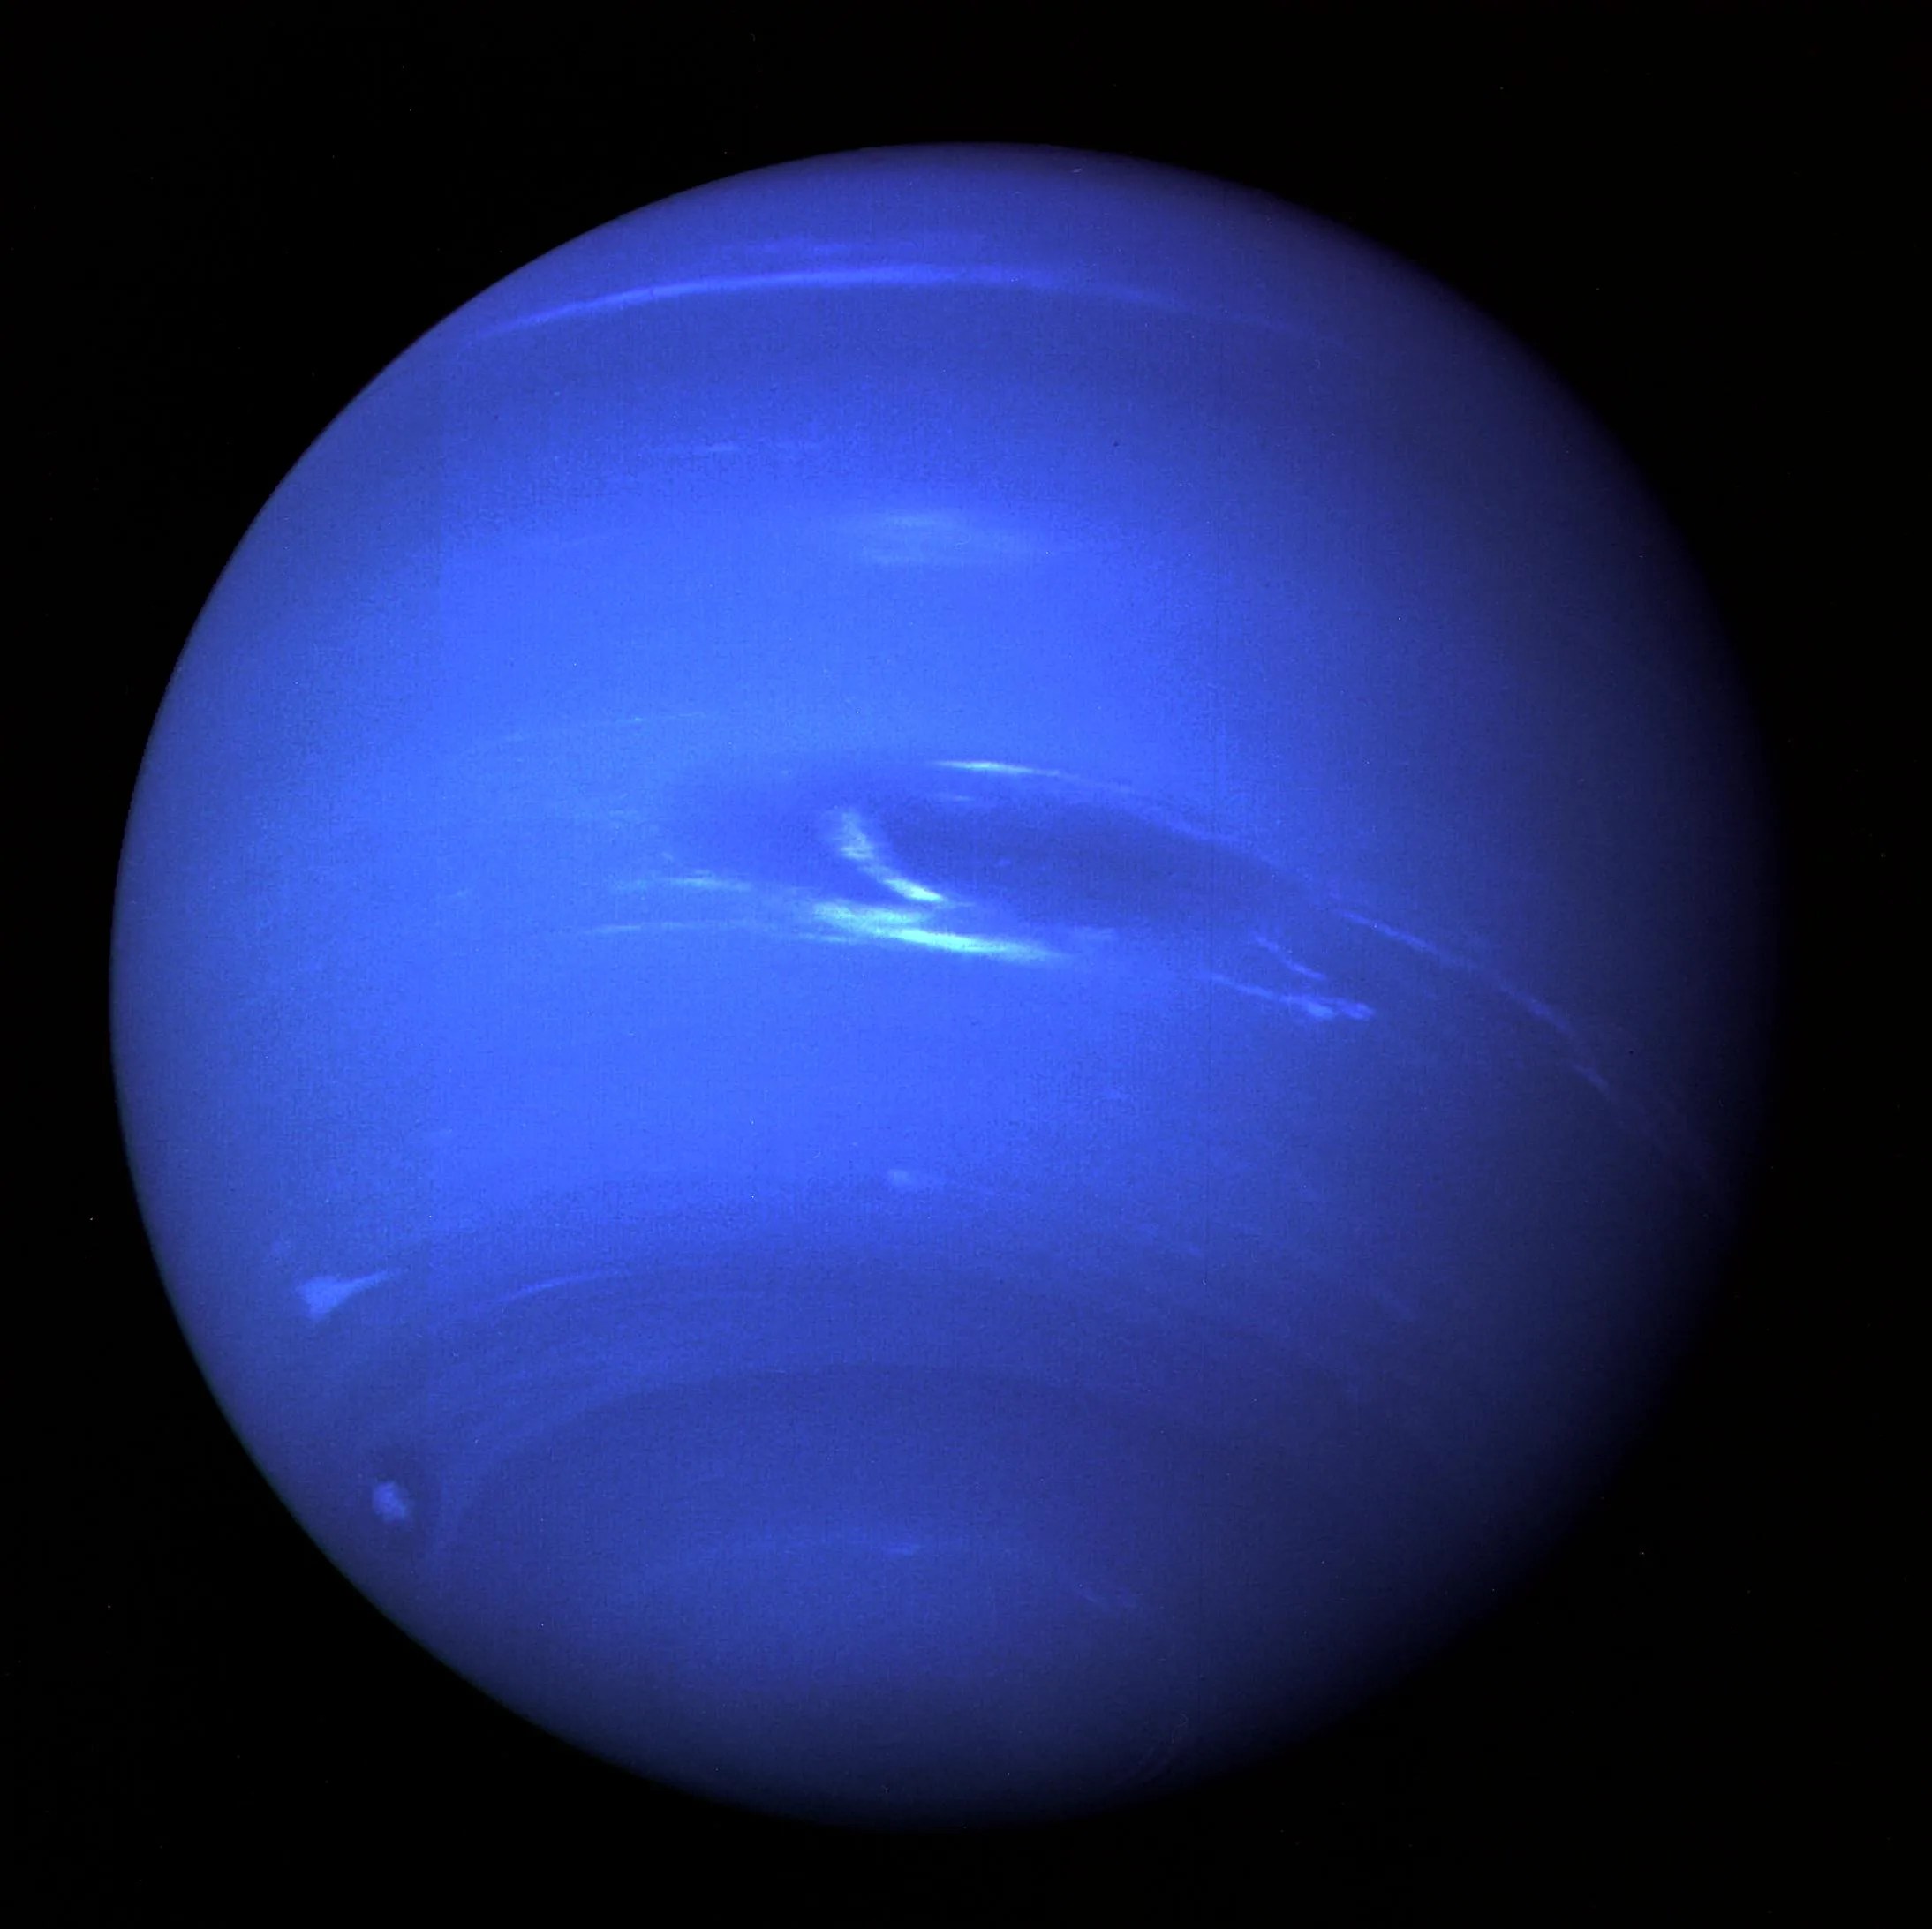 Neptune is bright, and deep blue in this image.